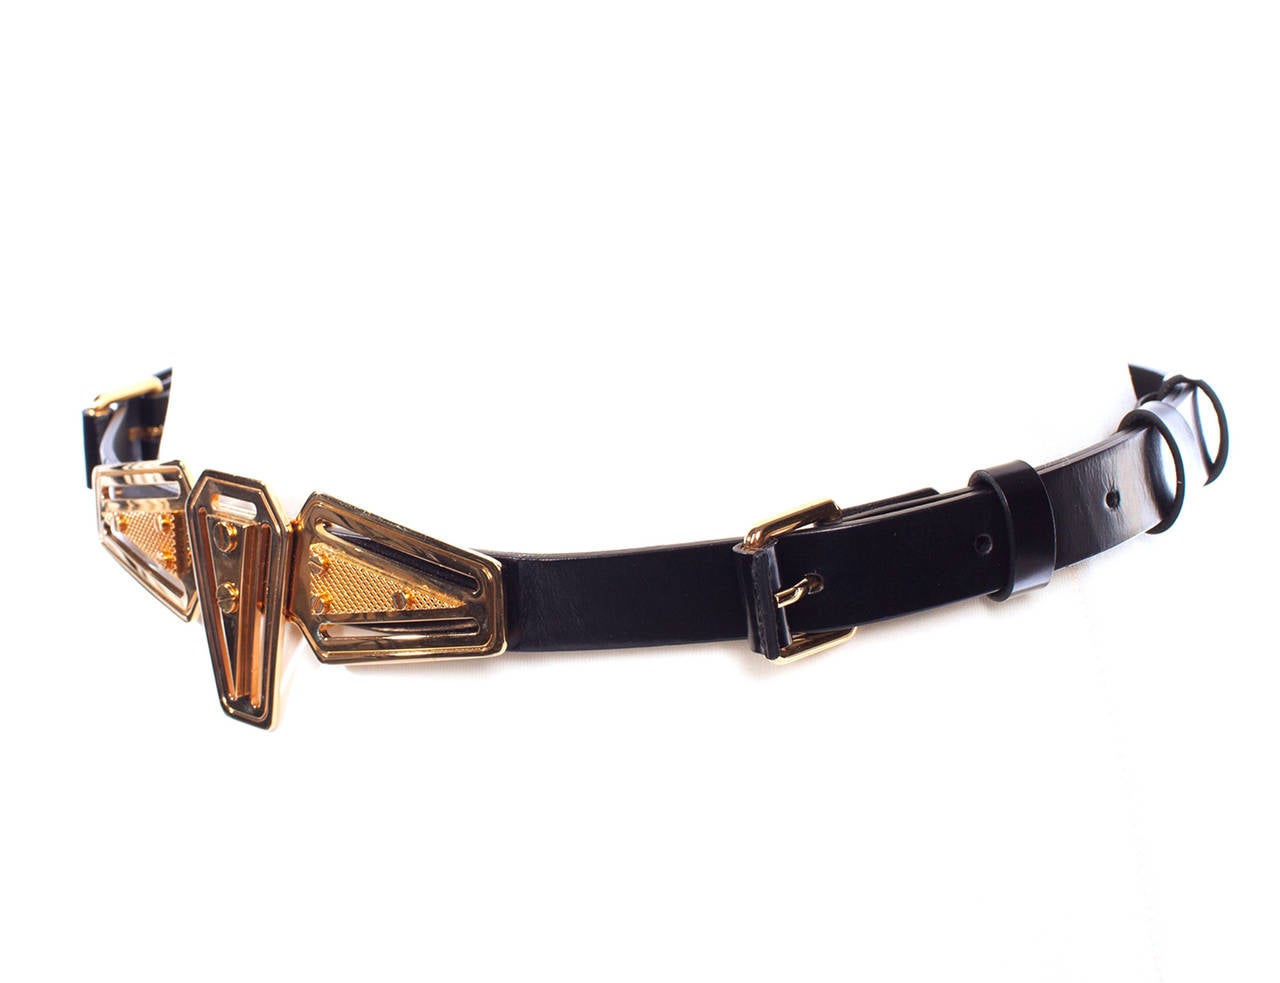 Balenciaga by Nicolas Ghesquière Tron belt from SS05.  Belt is incredble and with many details, 